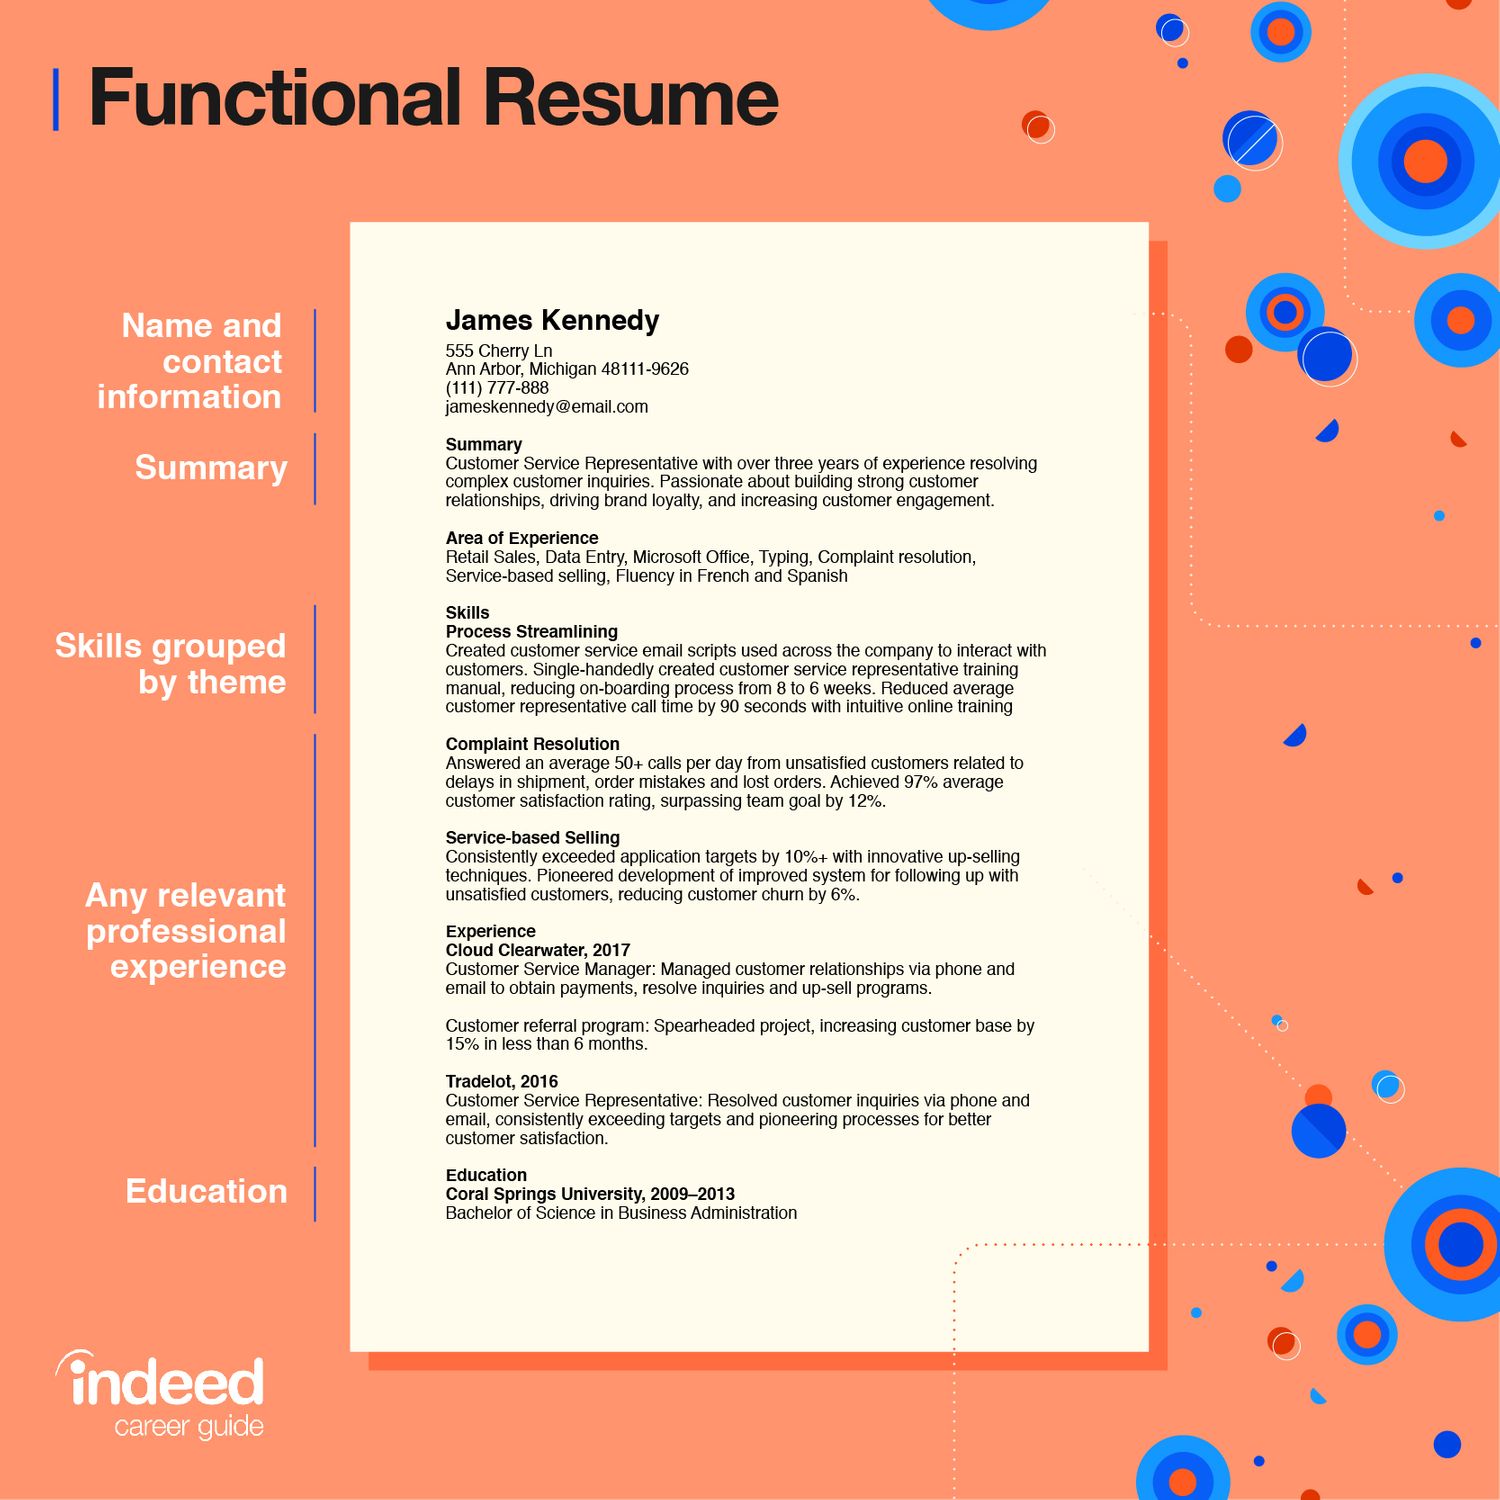 Sample functional resume by Indeed indicating recommended sections